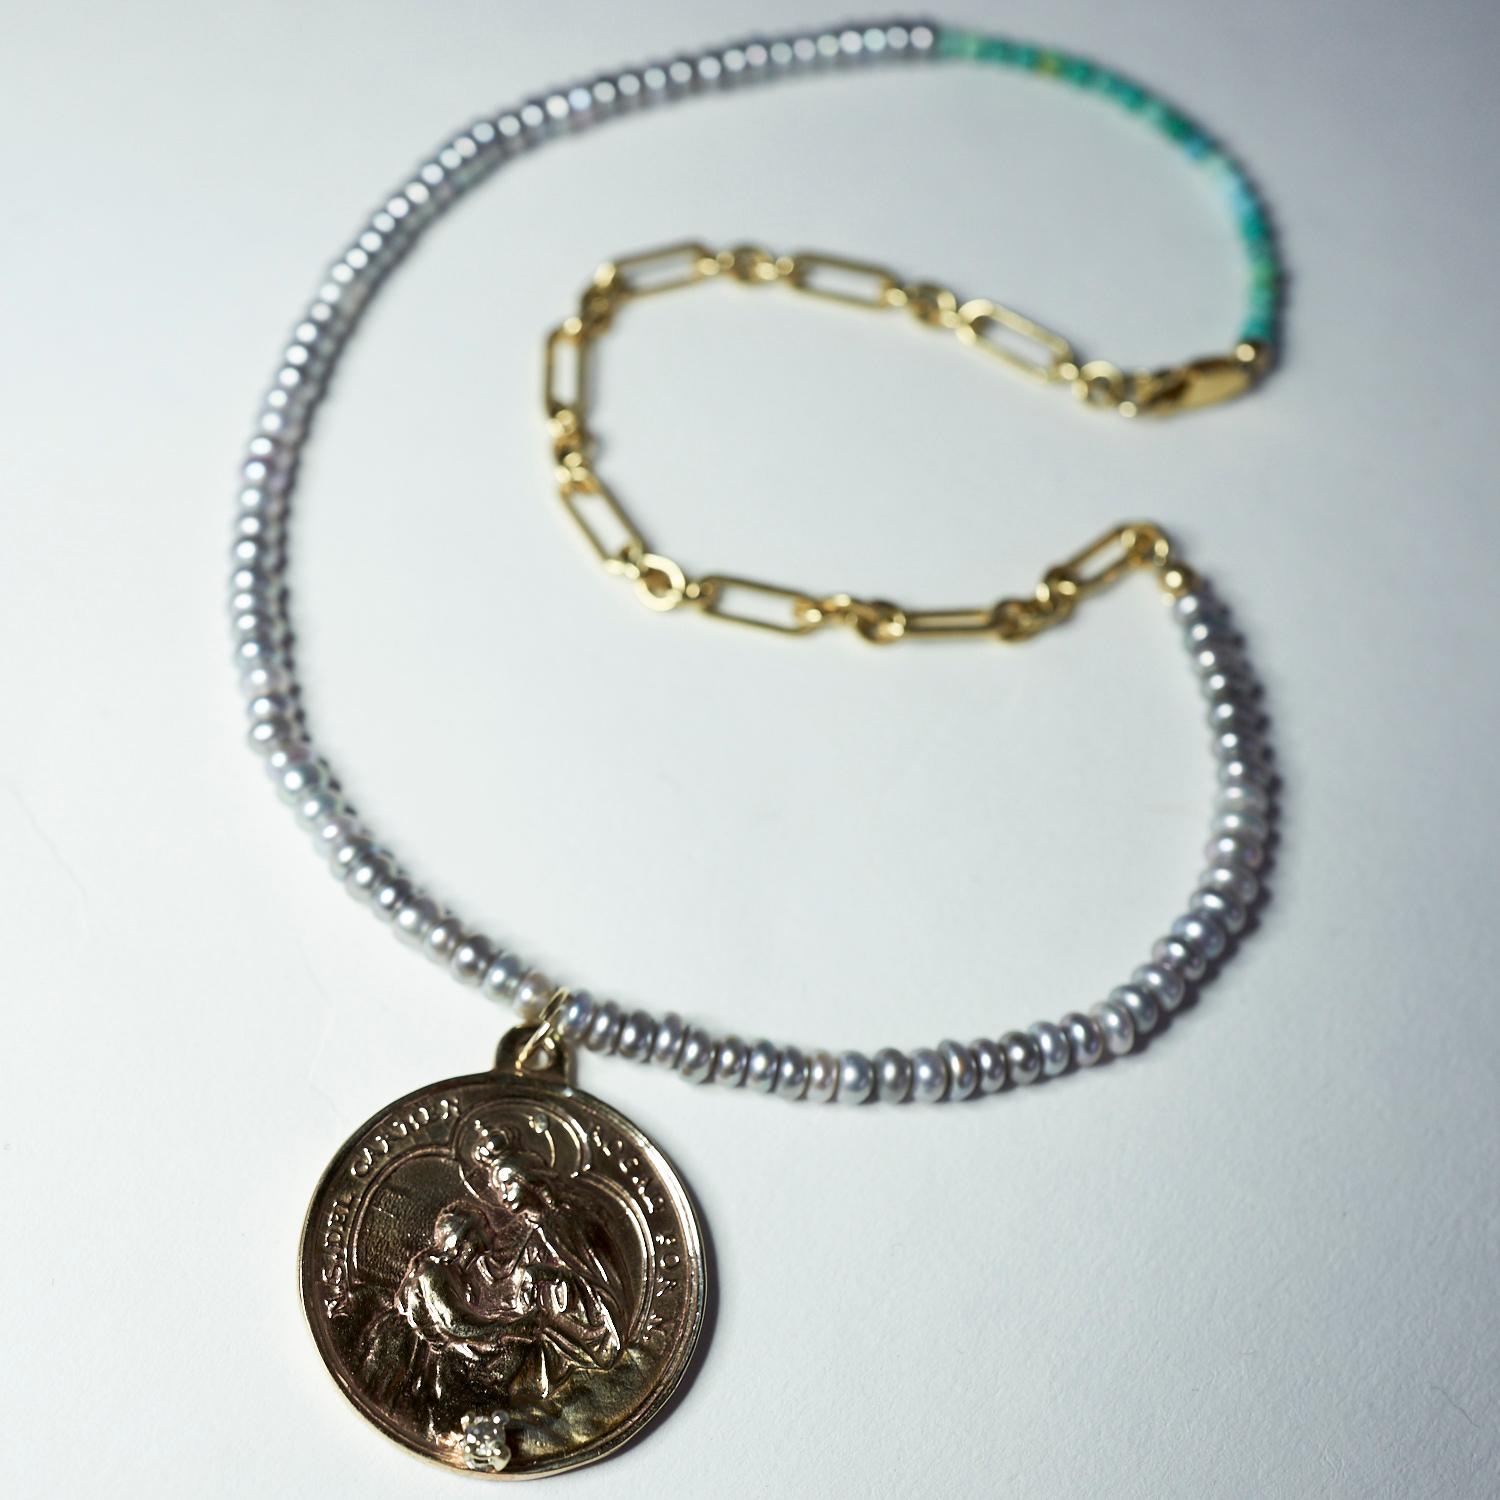 Diamond Virgin Mary Medal Silver Coin Choker Pearl Chain Necklace J Dauphin In New Condition For Sale In Los Angeles, CA